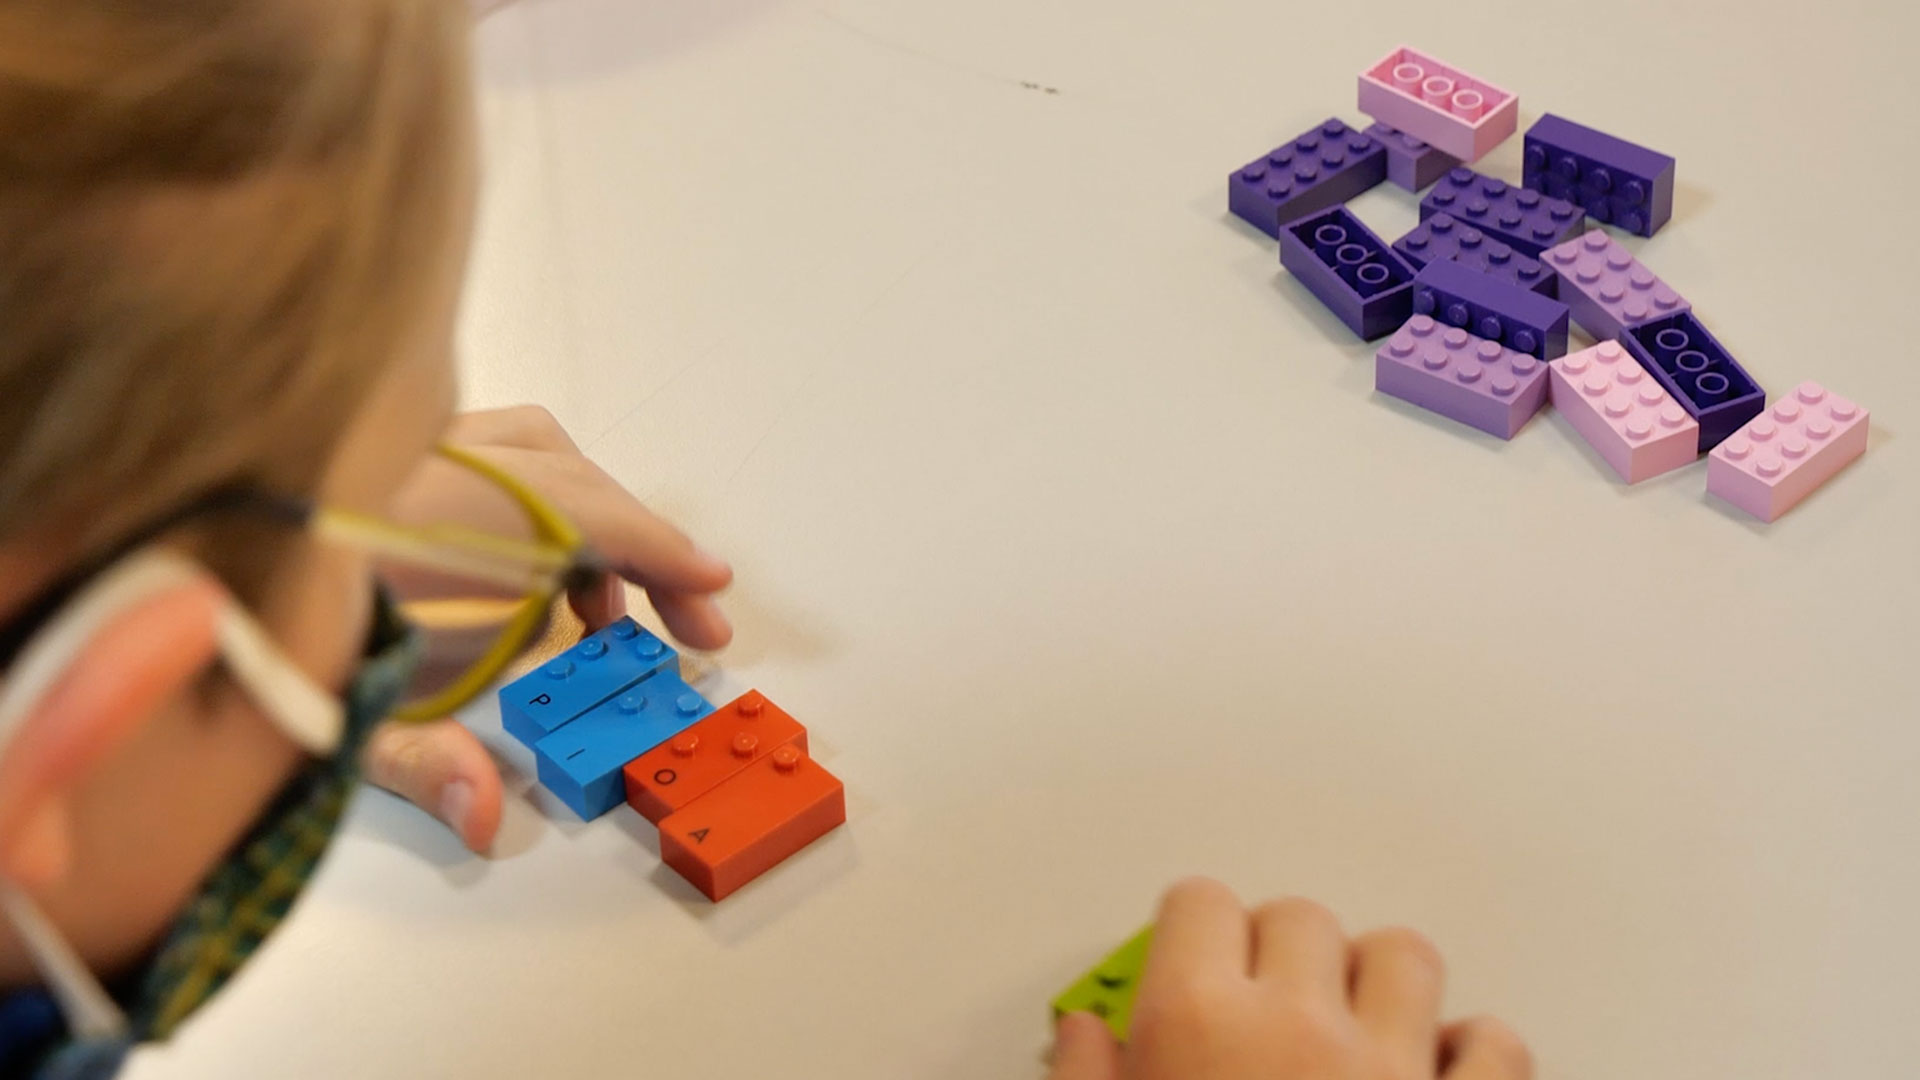 Child doing an activity with both classic and braille LEGO Bricks.